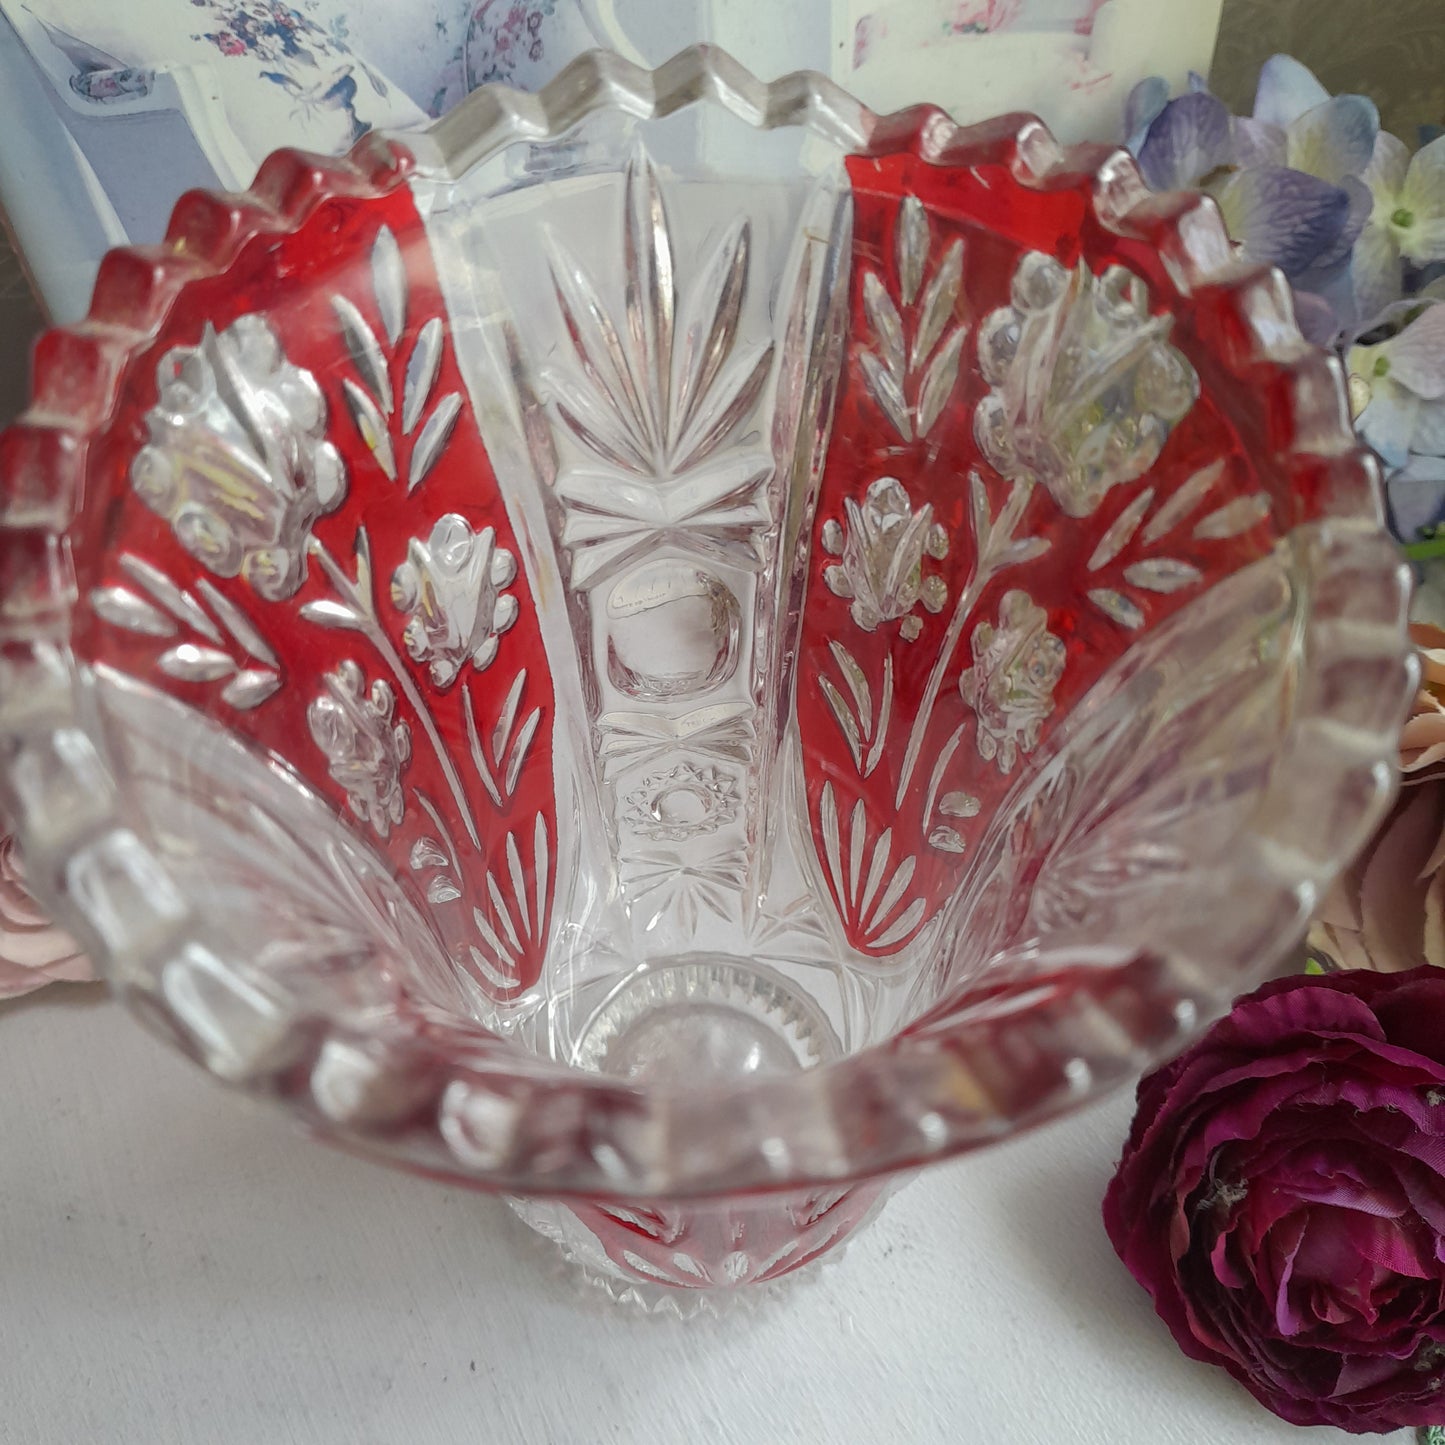 Darling Anna Hutte Bleikristall Ruby Red & Crystal Vase With Flowers Sawtooth Rim